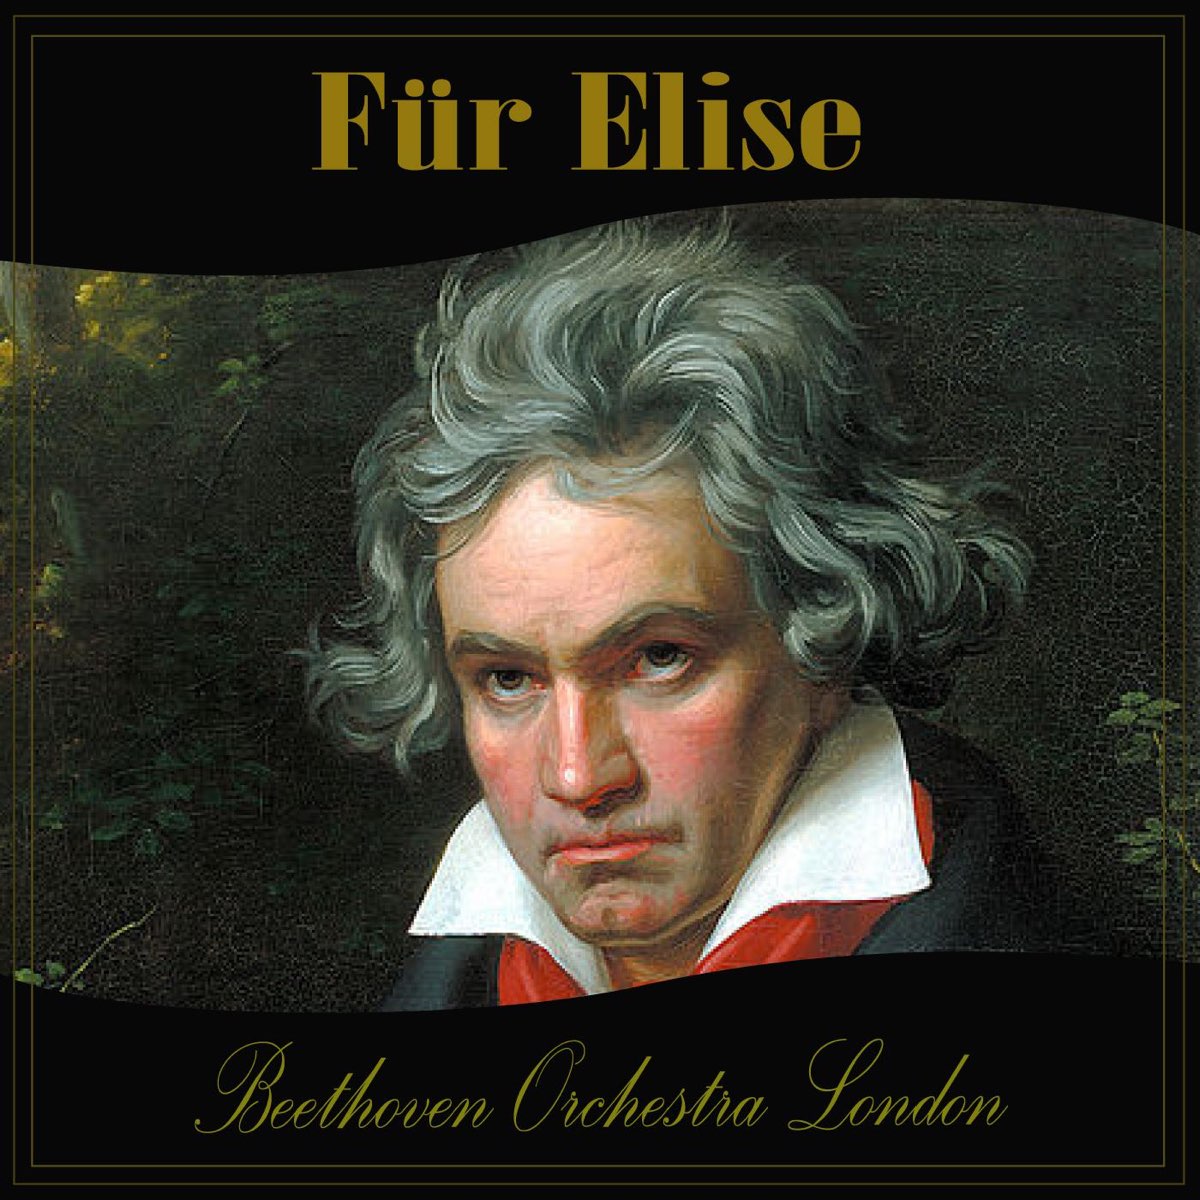 Für Elise - Single - Album by Beethoven Orchestra London - Apple Music